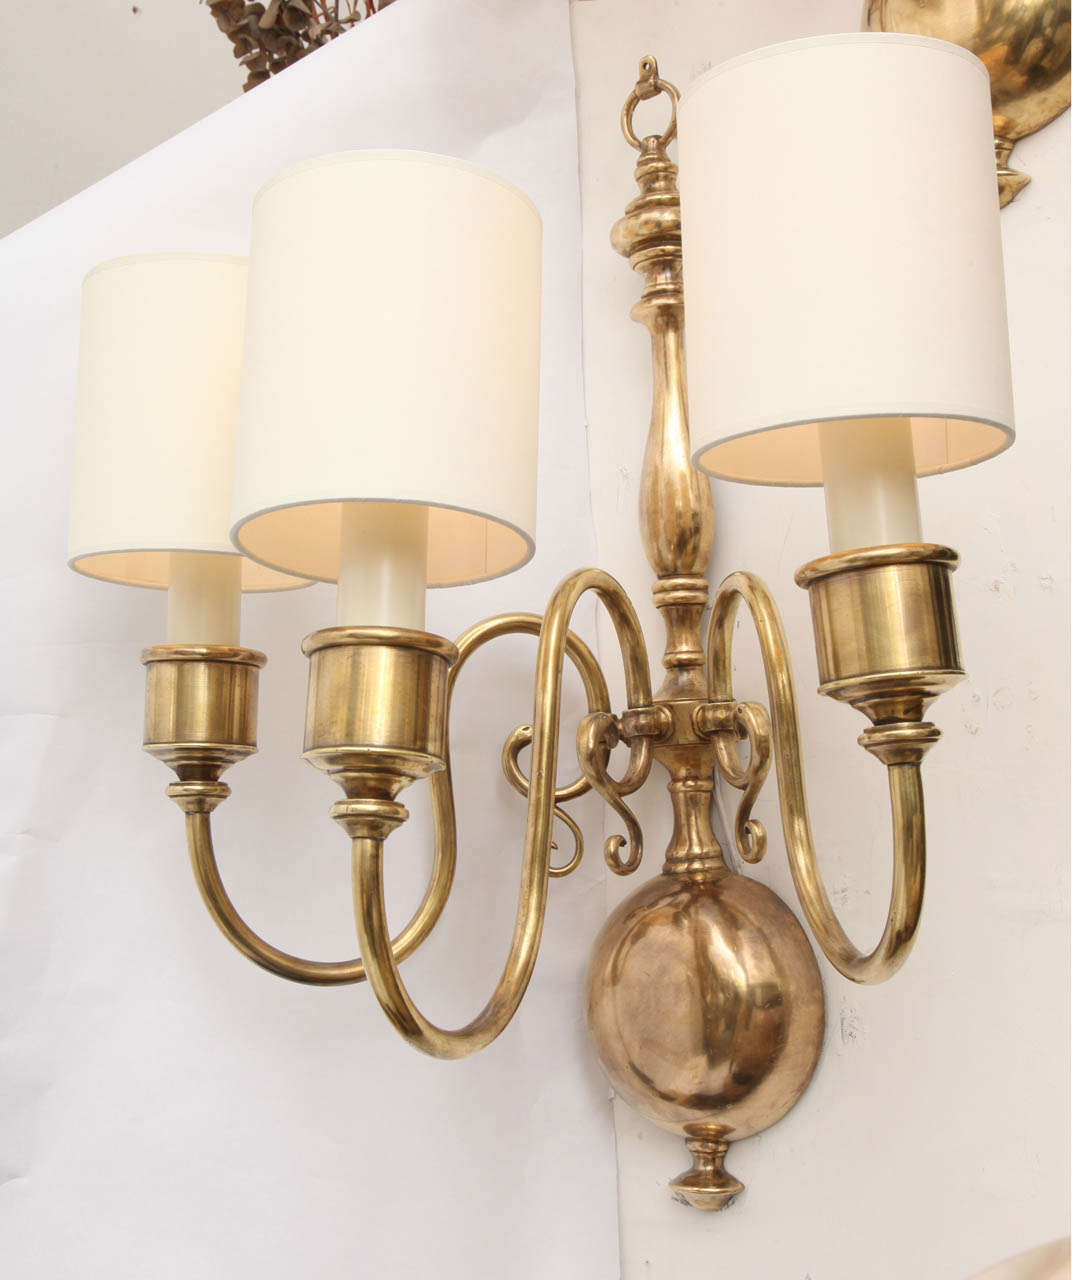 A pair of 1920s classical modern brass wall sconces.